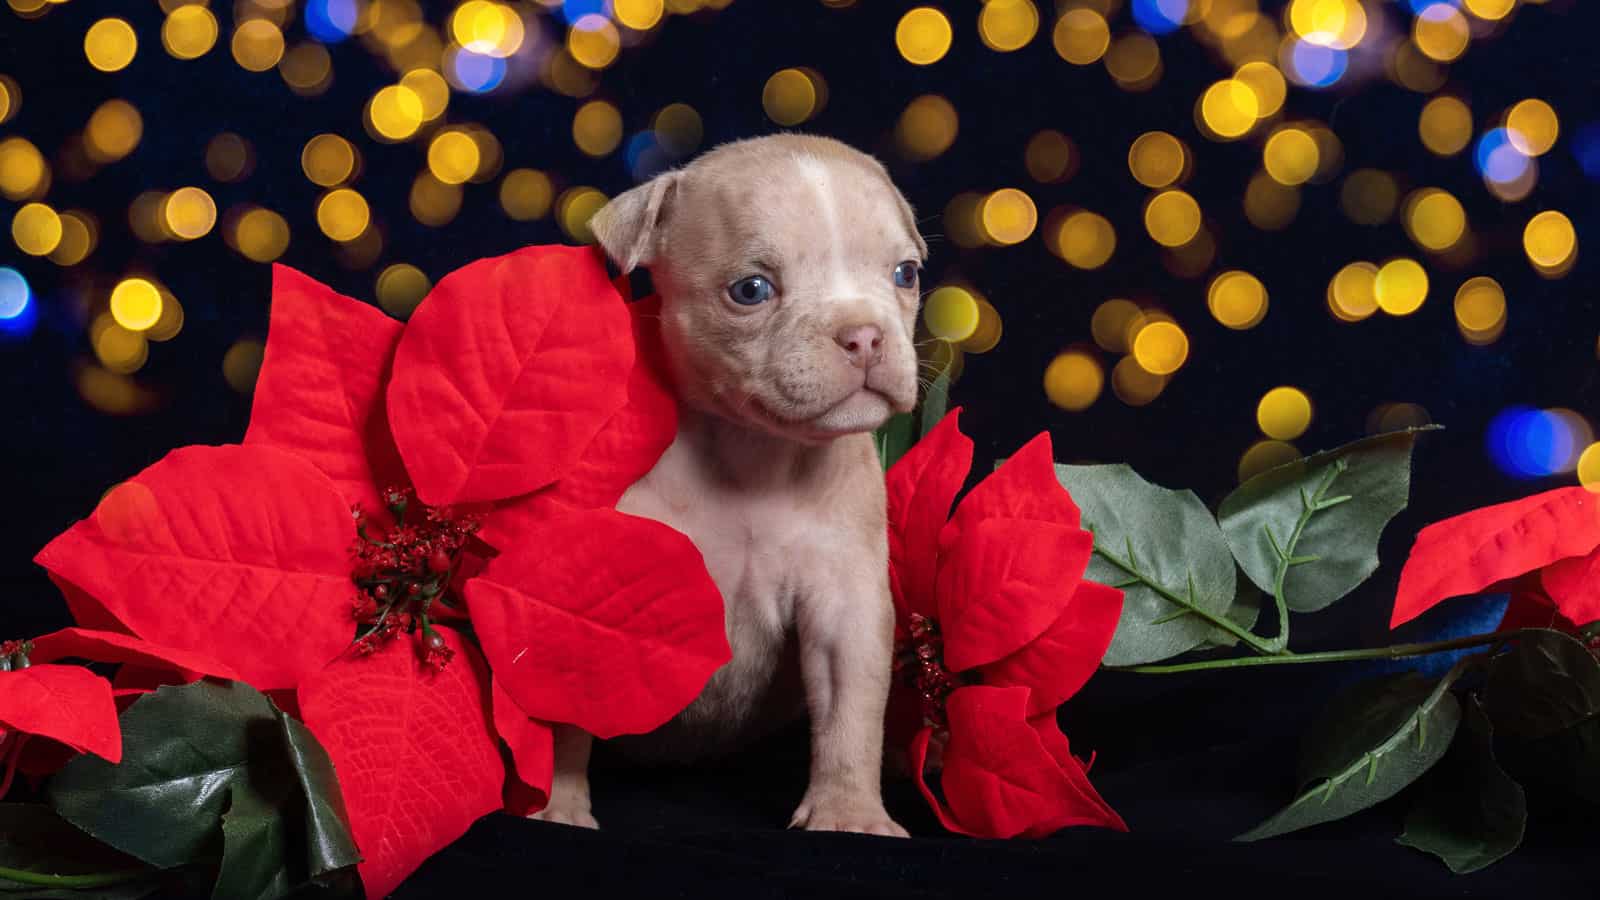 A cute dog walking between poinsettia flowers, The Poinsettia and Pet Myth: How Toxic Are They? - 1600x900